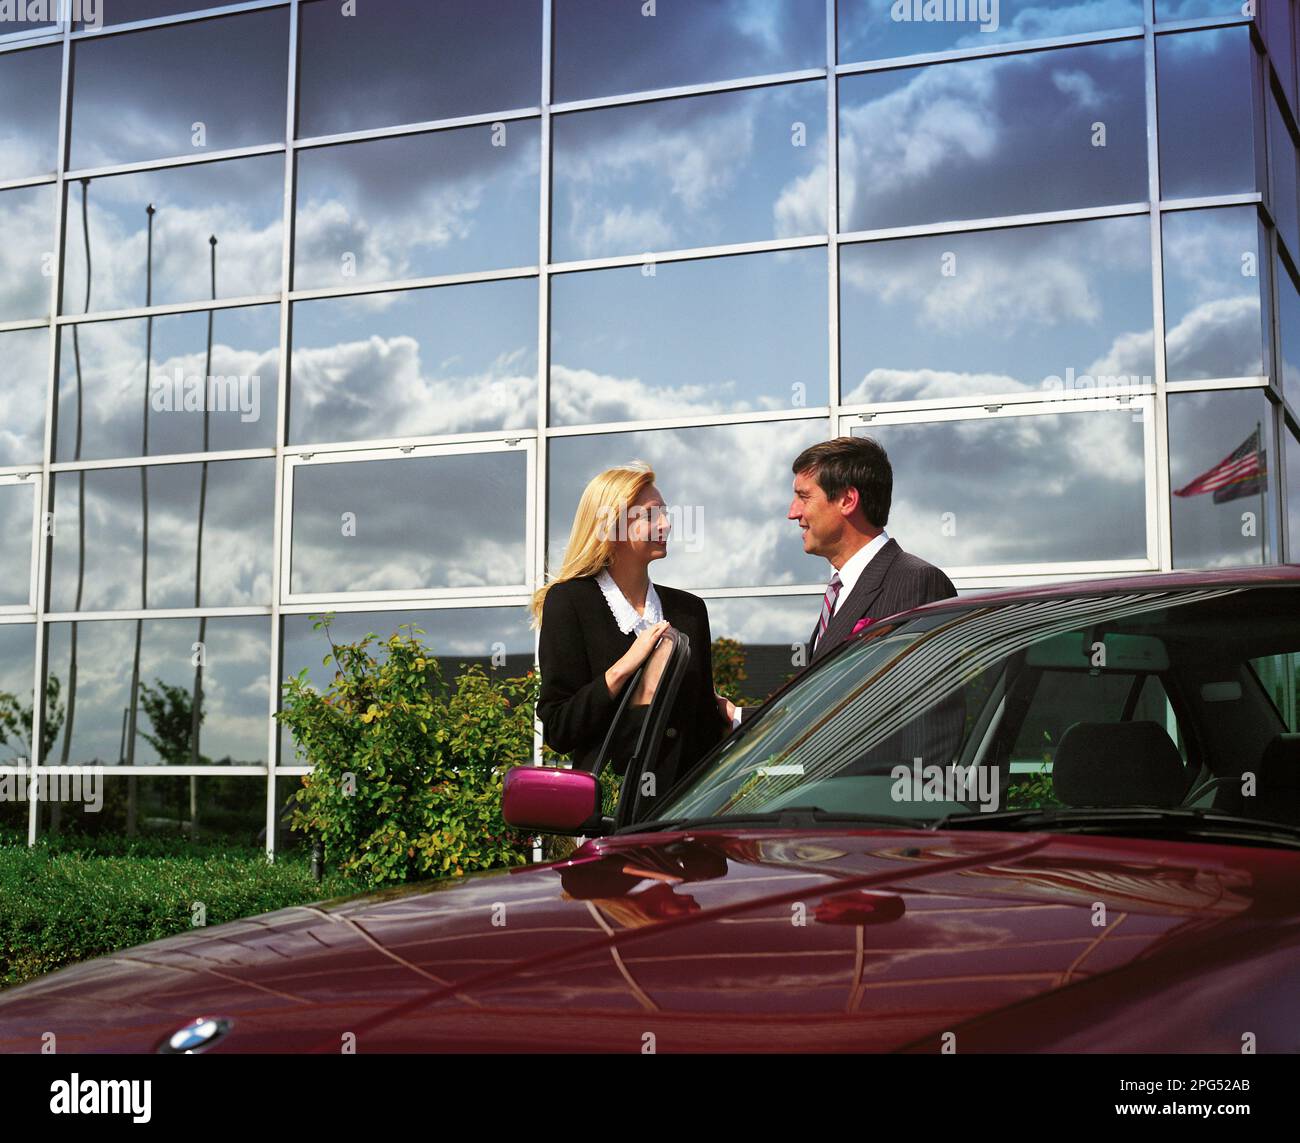 Man & woman business executives standing by car outside commercial building. Stock Photo